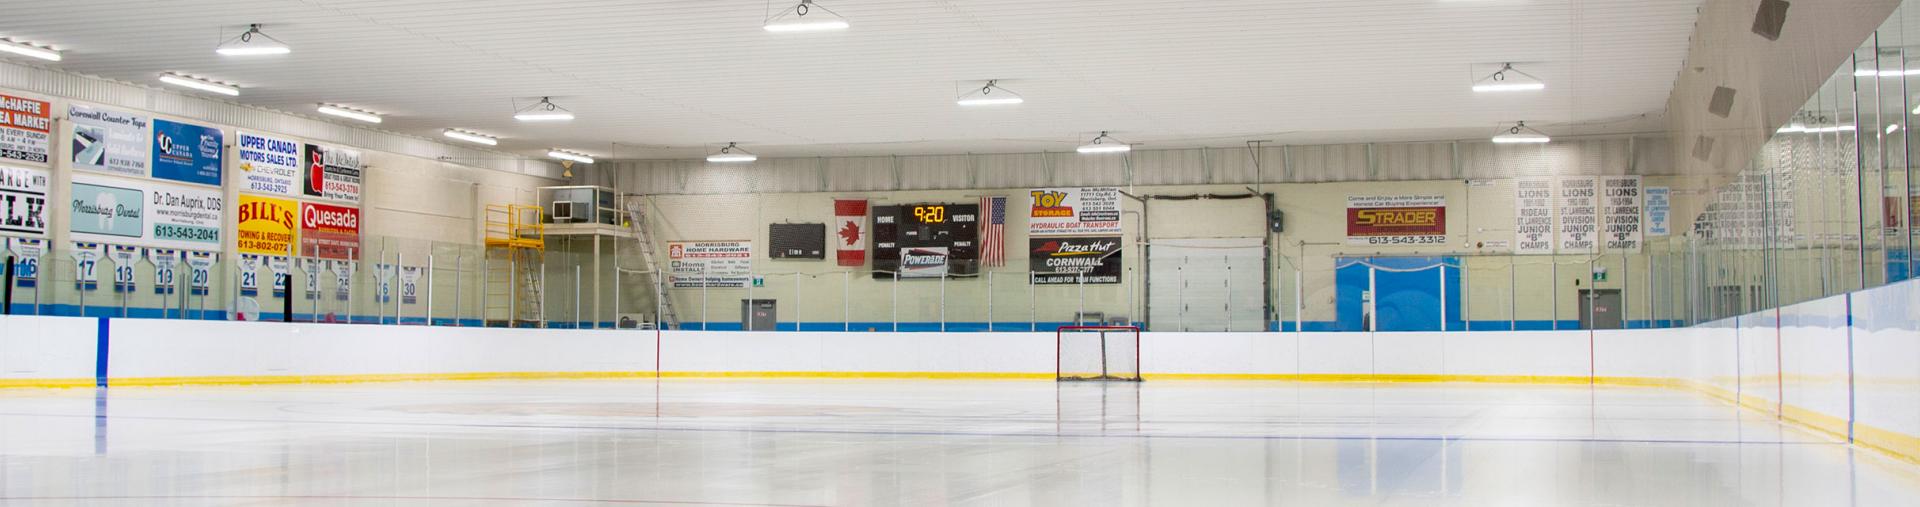 Morrisburg Arena ice surface